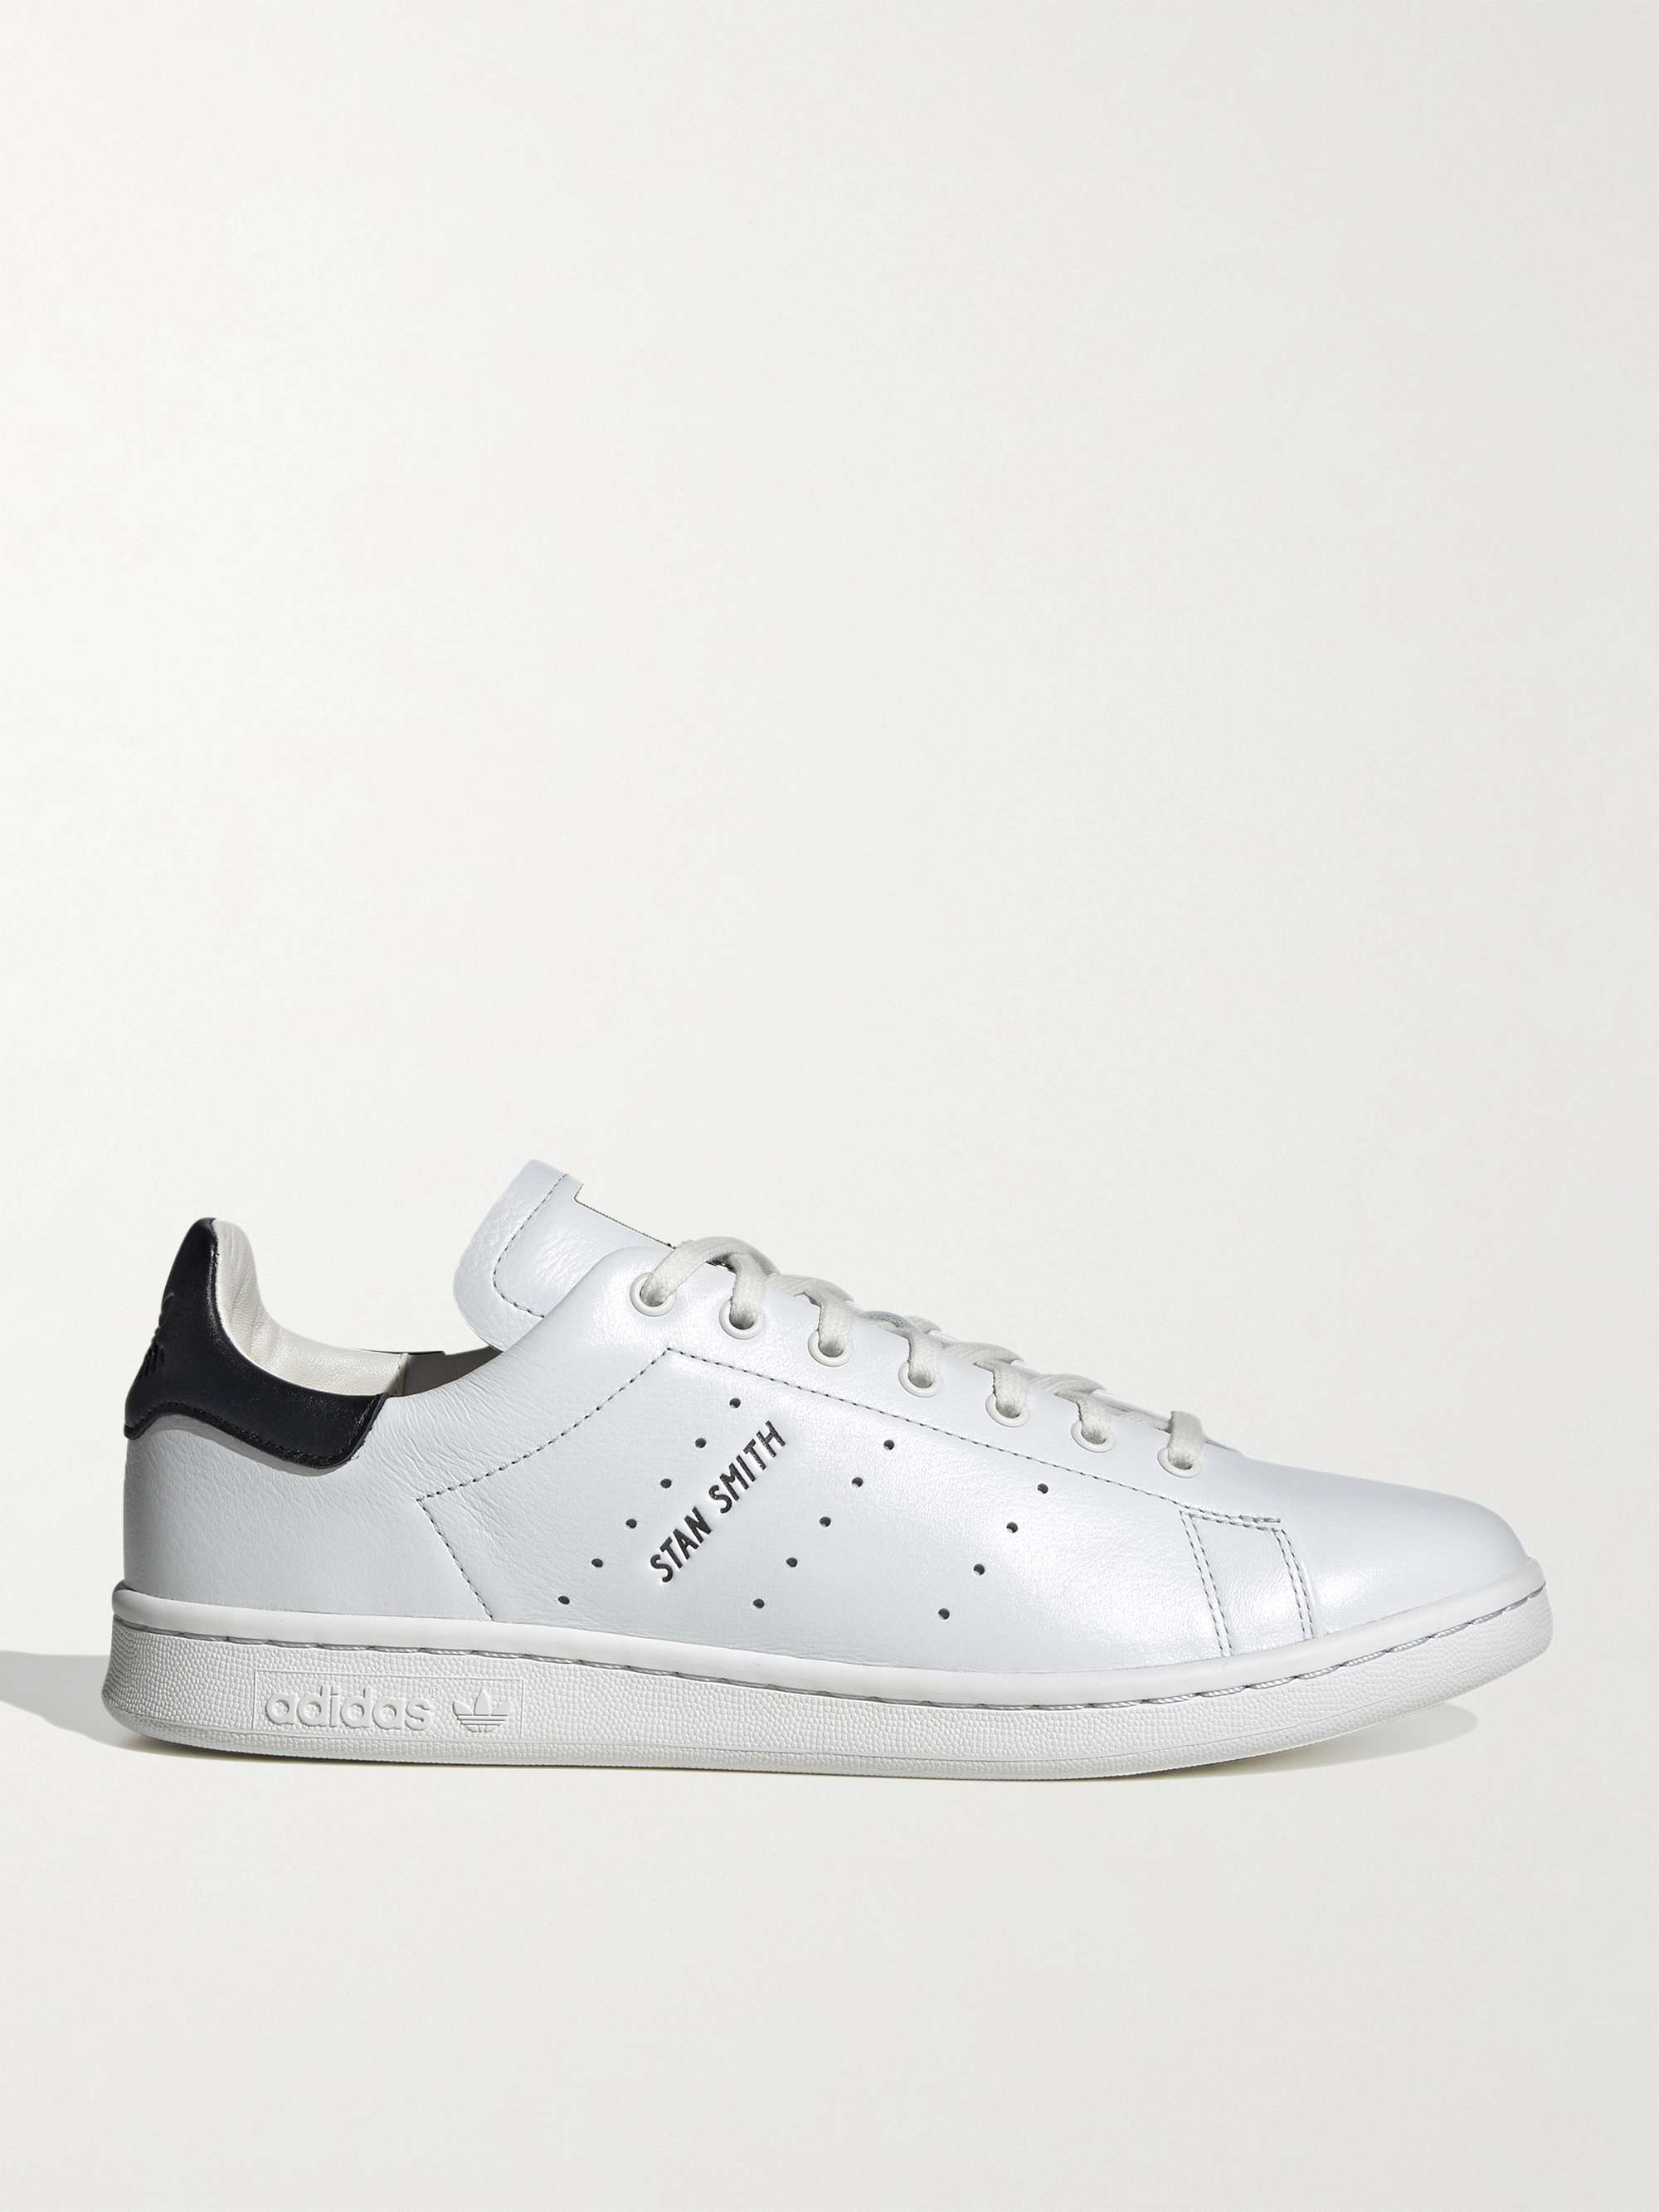 ADIDAS ORIGINALS Stan Smith Leather Sneakers for Men